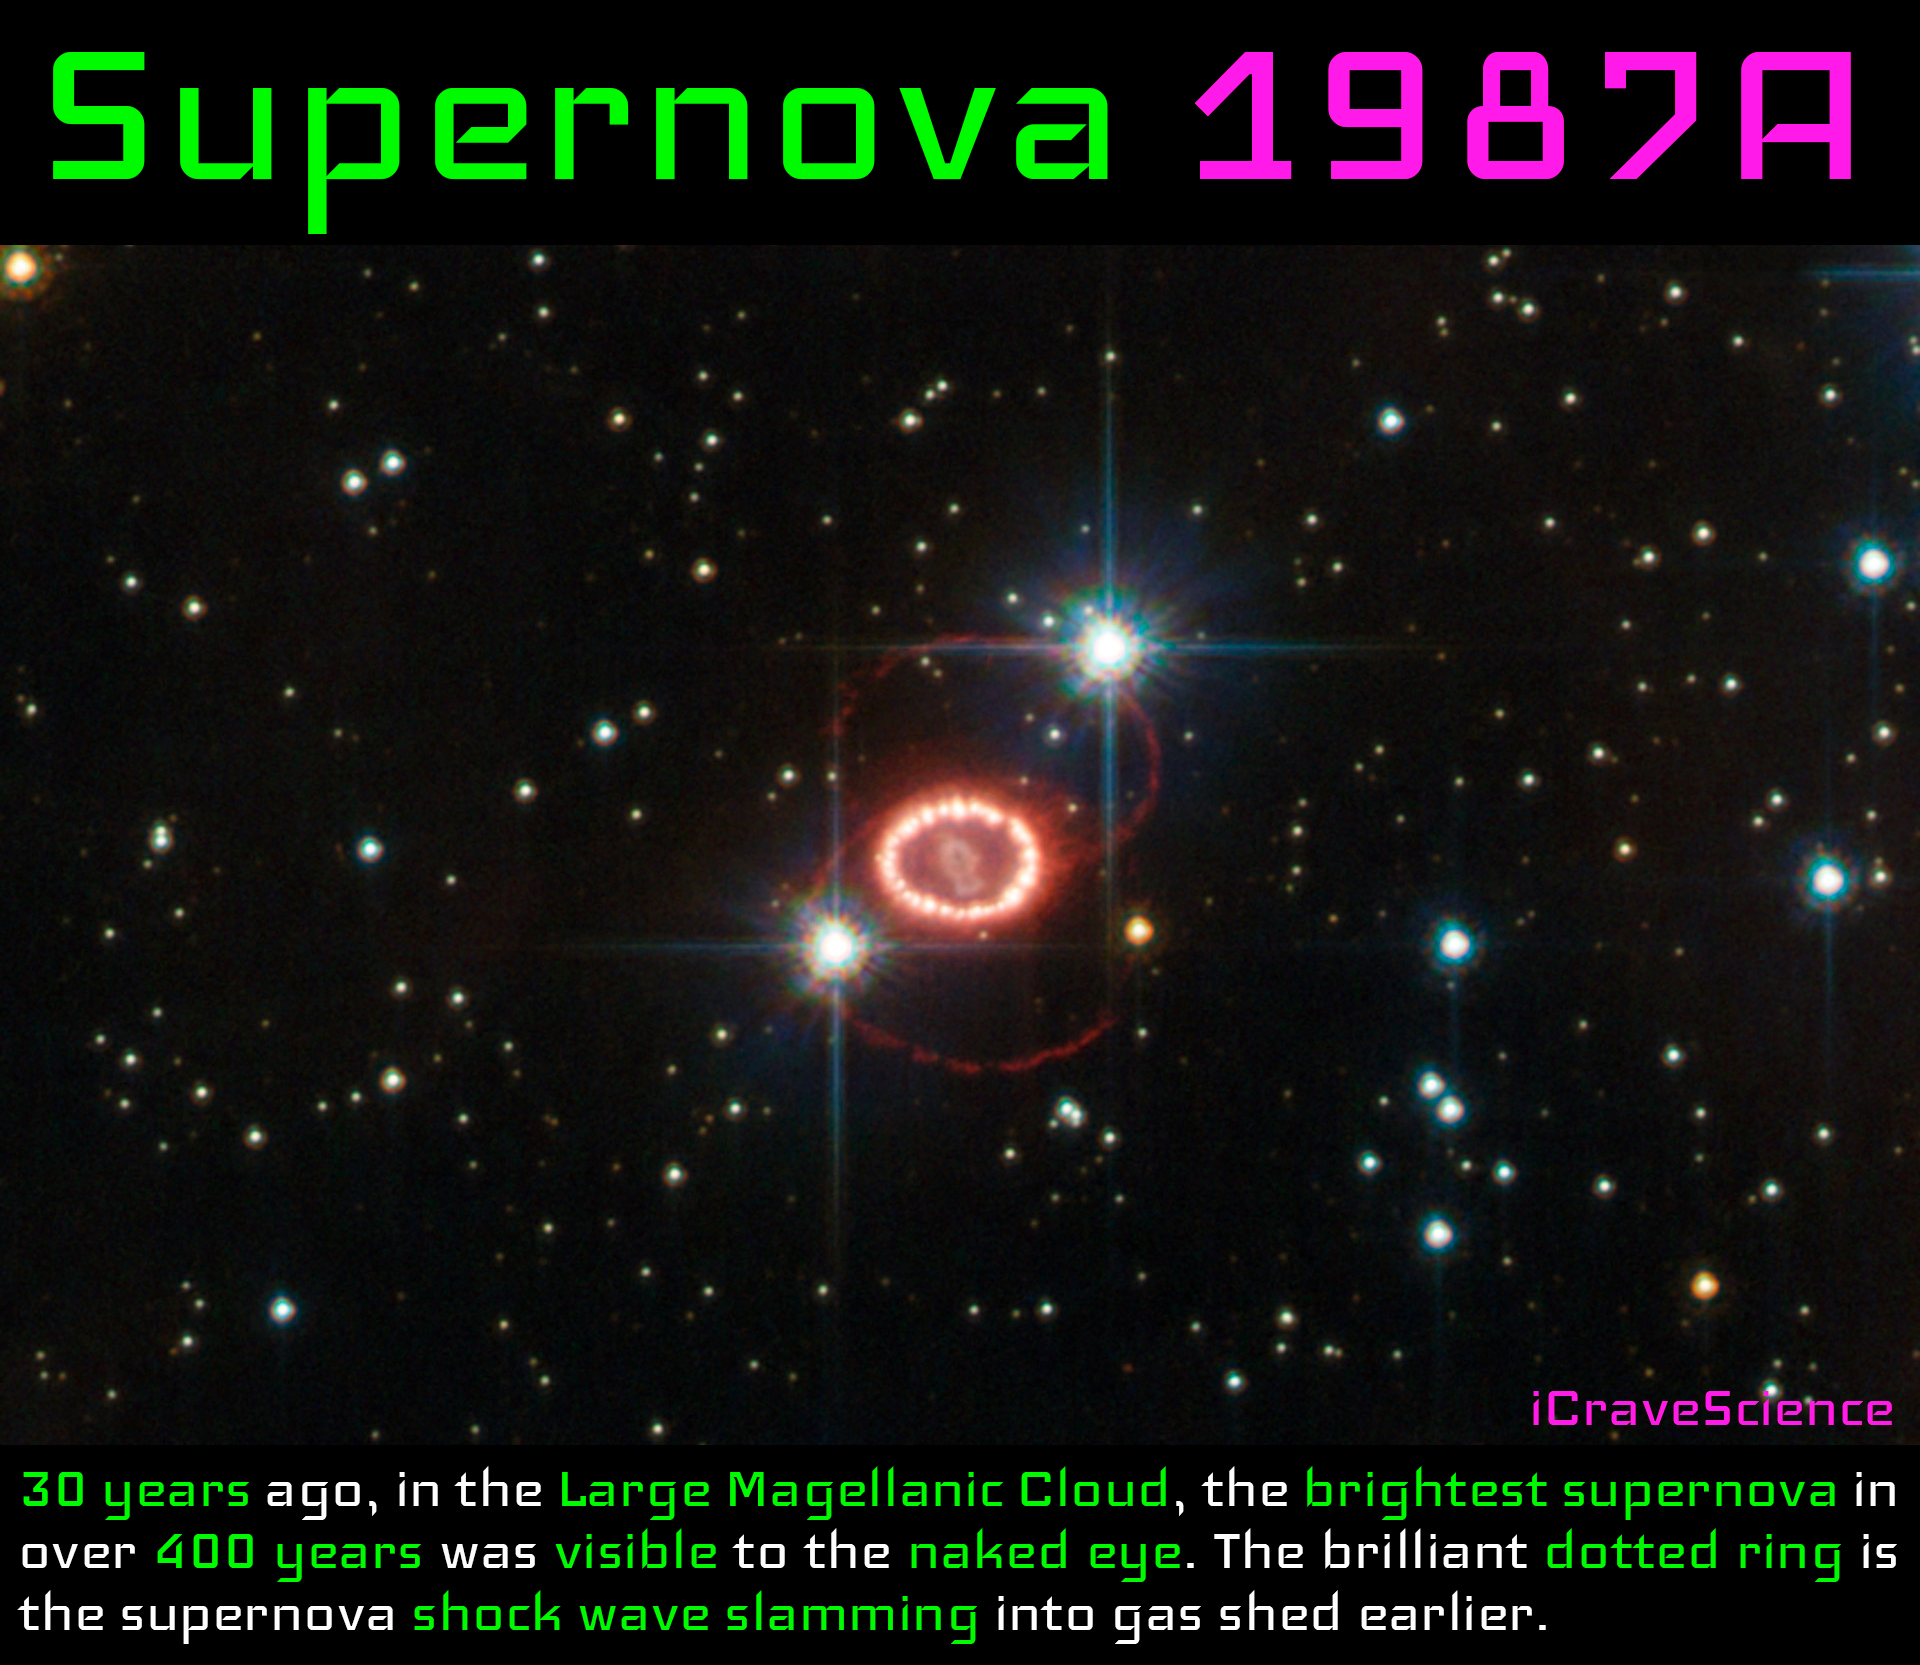 Massive supernova visible from Earth - YouTube